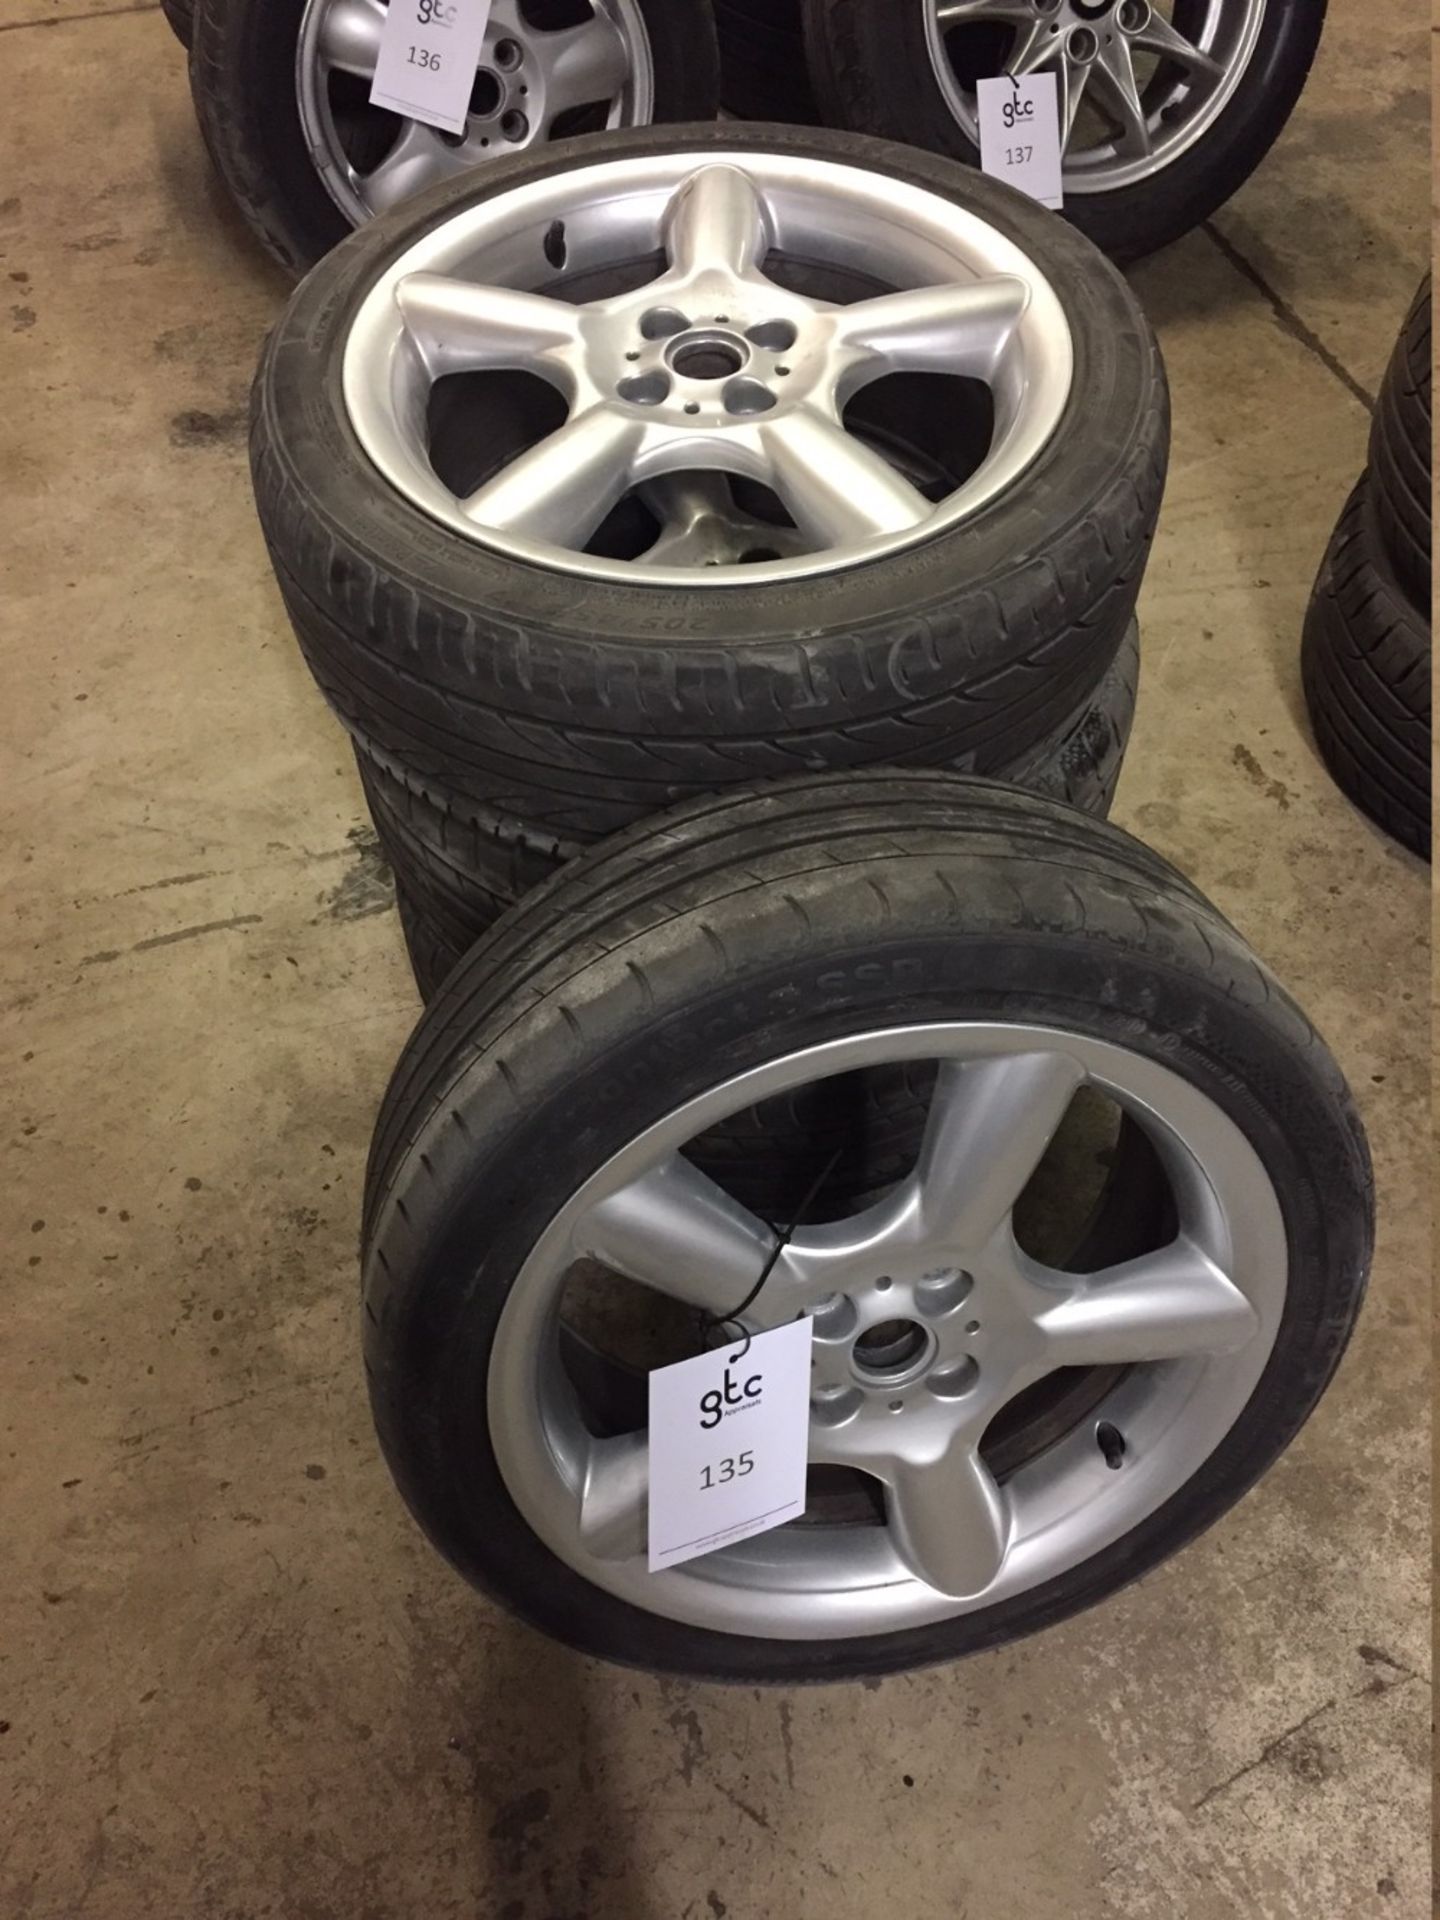 Set of 5 Spoke Alloy Wheels with 205/45/Z R17 Part-worn Tyres (Manufacturer Unknown)